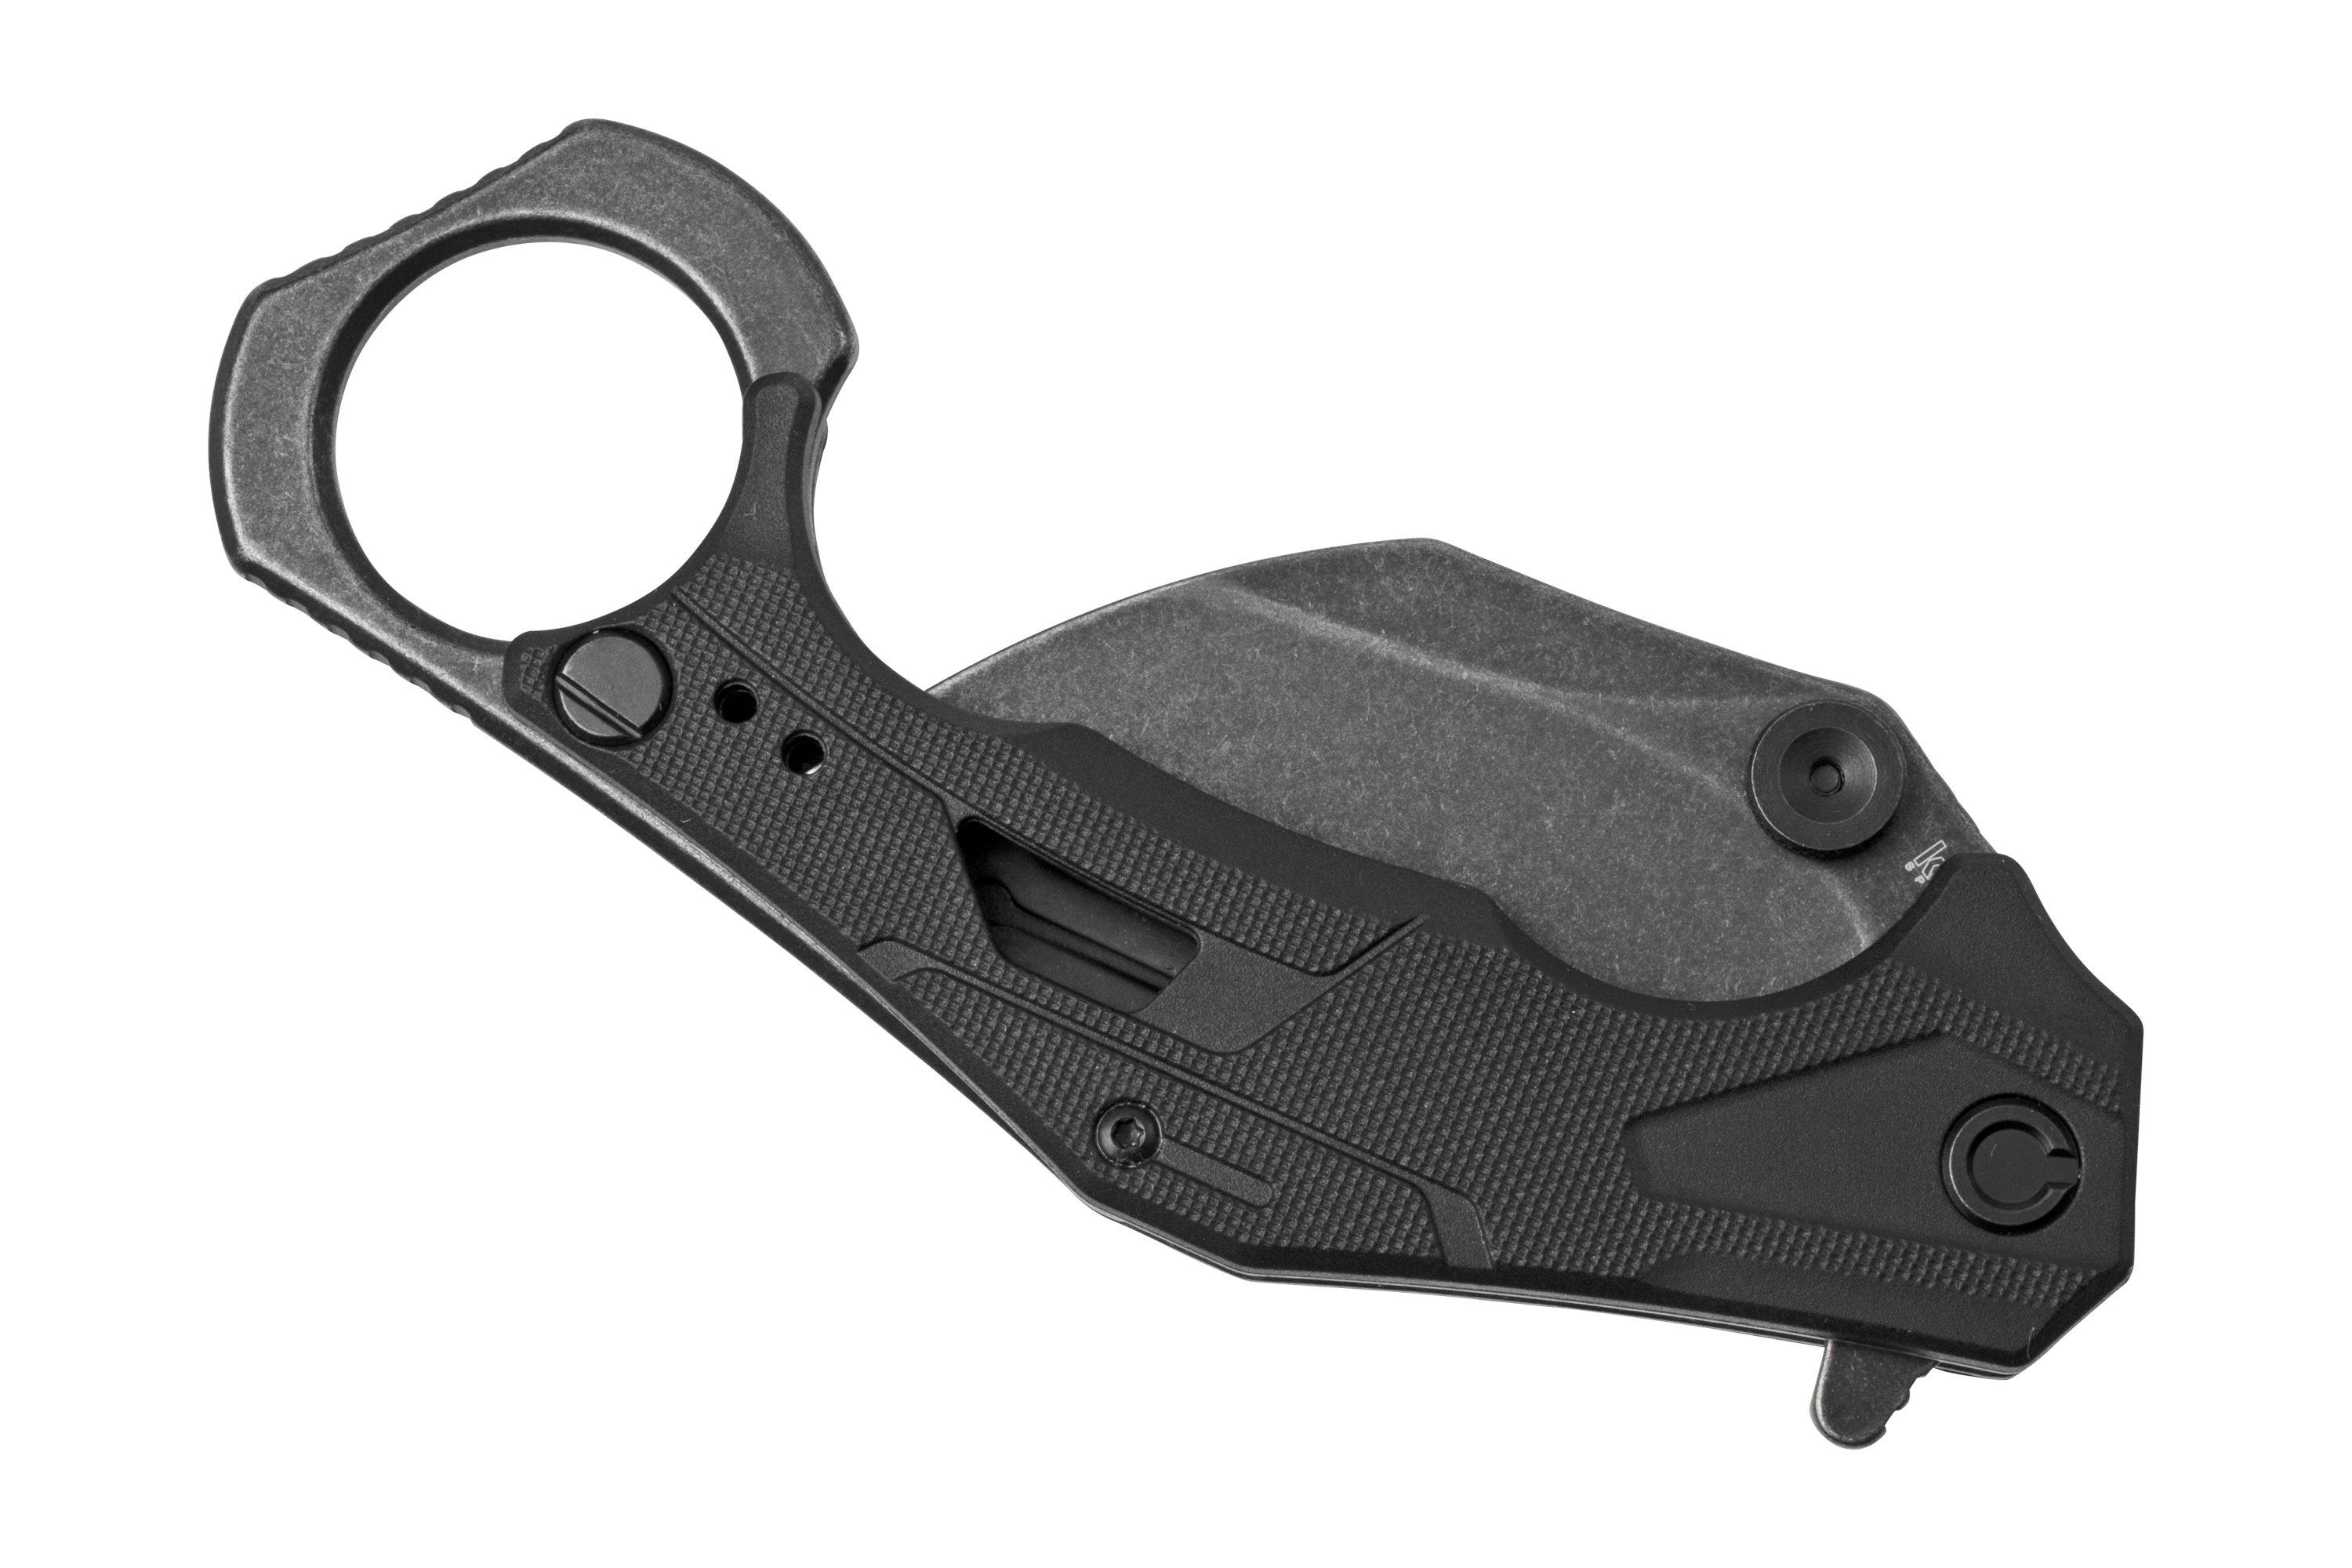 Kershaw Outlier, 2064